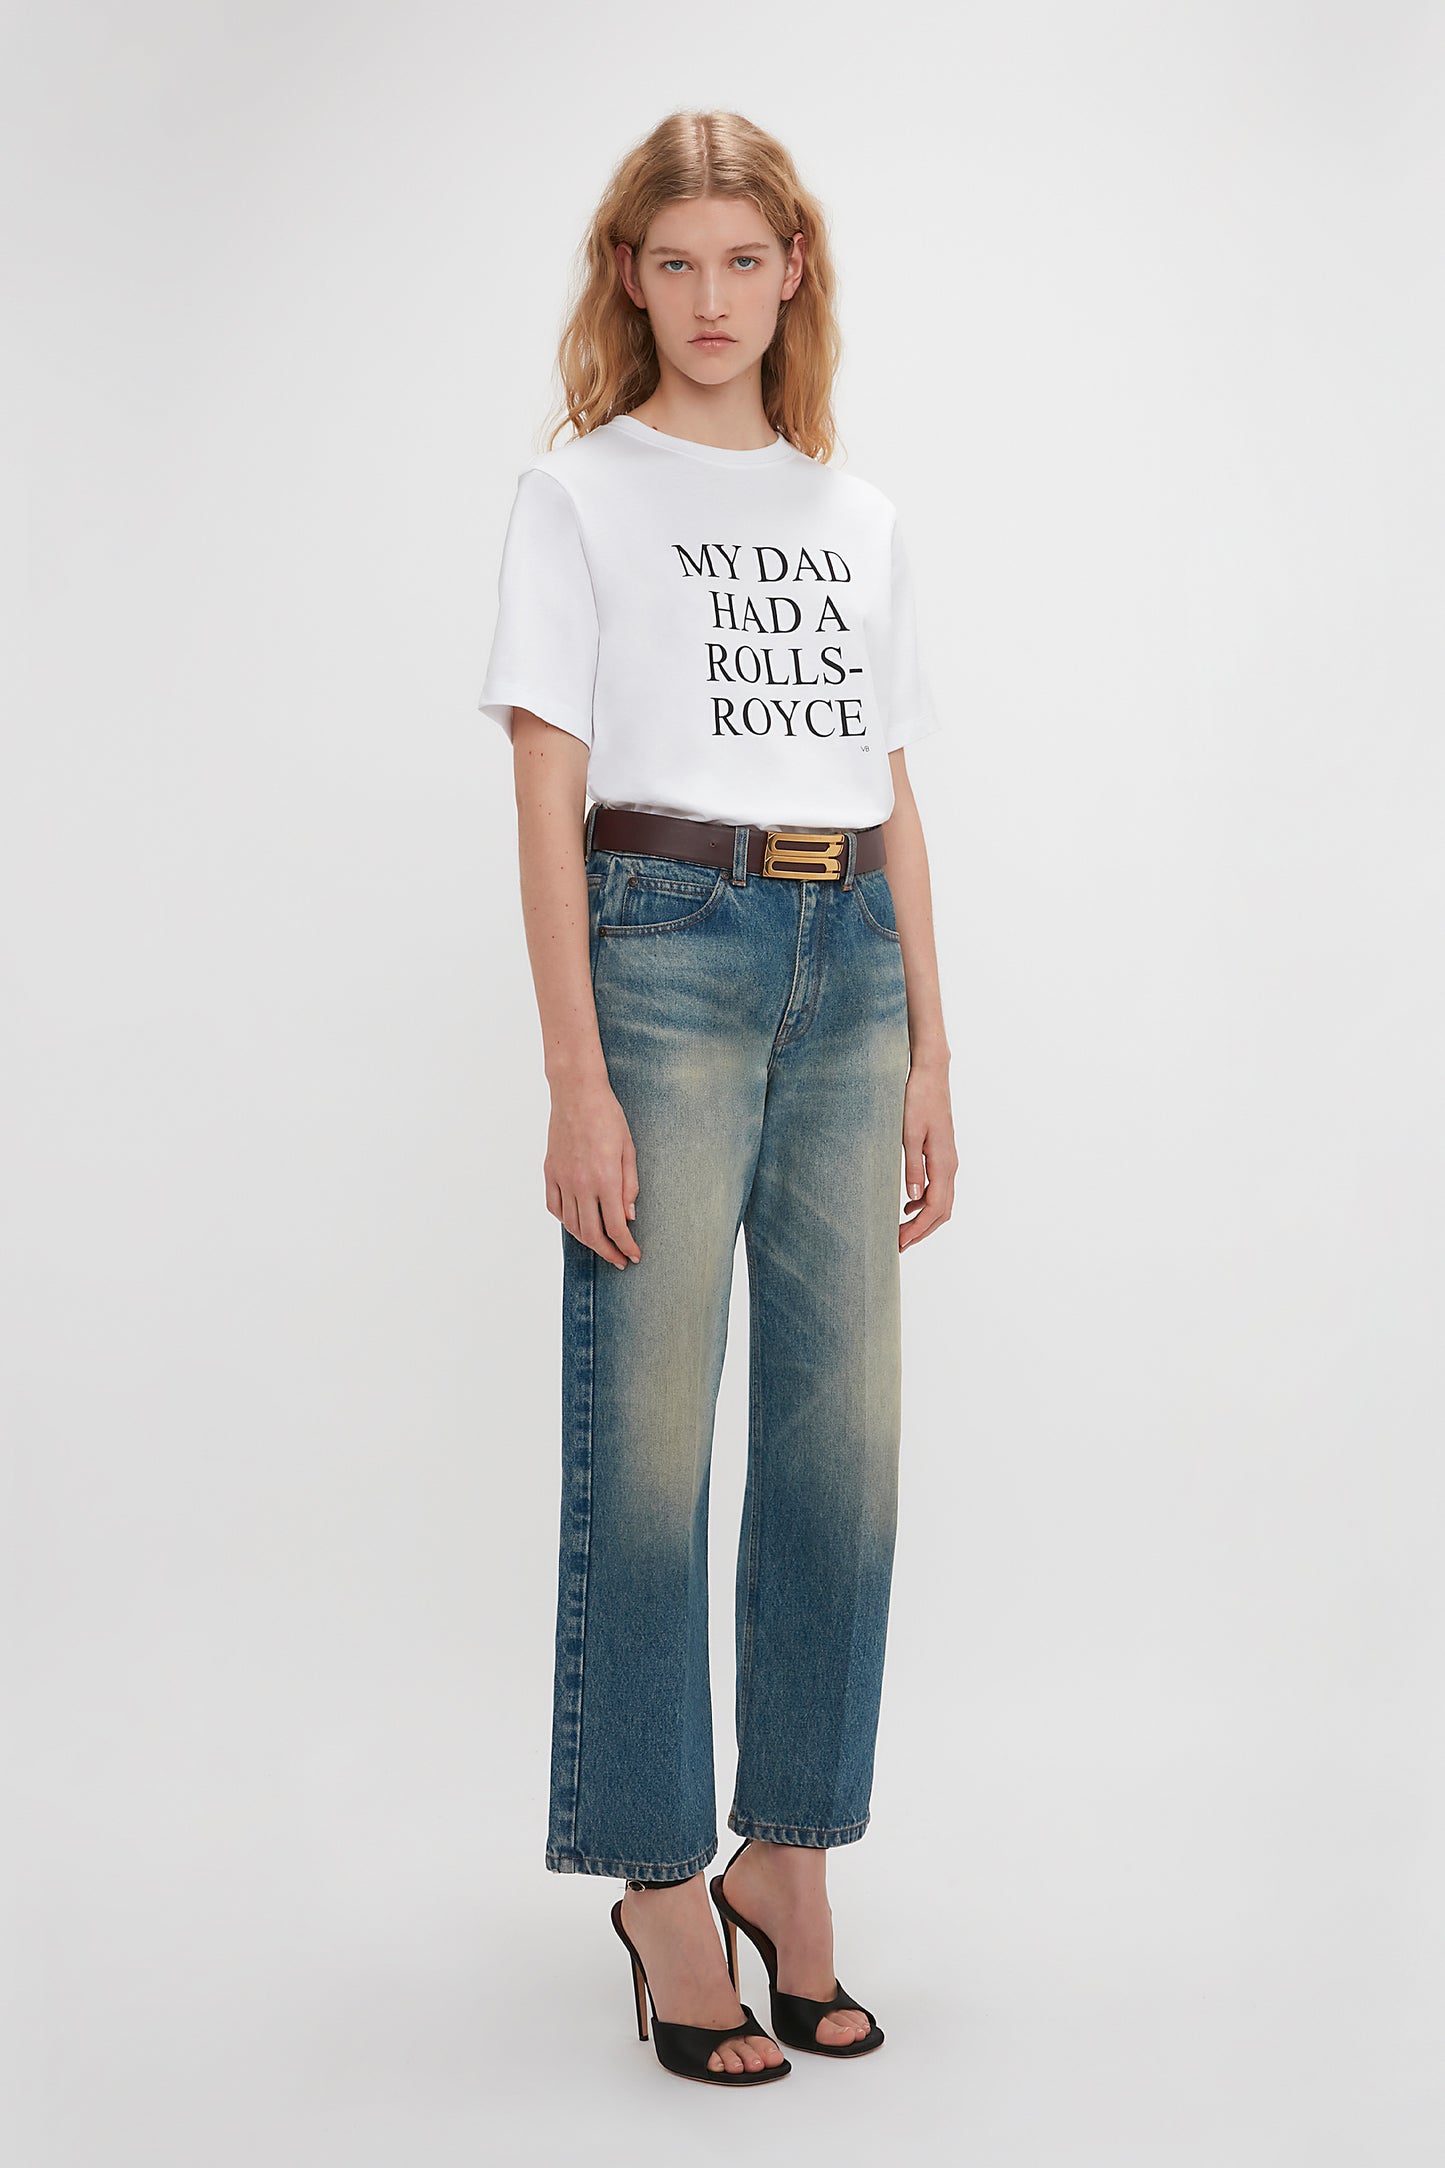 A woman standing in a studio wearing a white Exclusive 'My Dad Had A Rolls-Royce' slogan T-shirt by Victoria Beckham and faded blue jeans, paired with black heels.